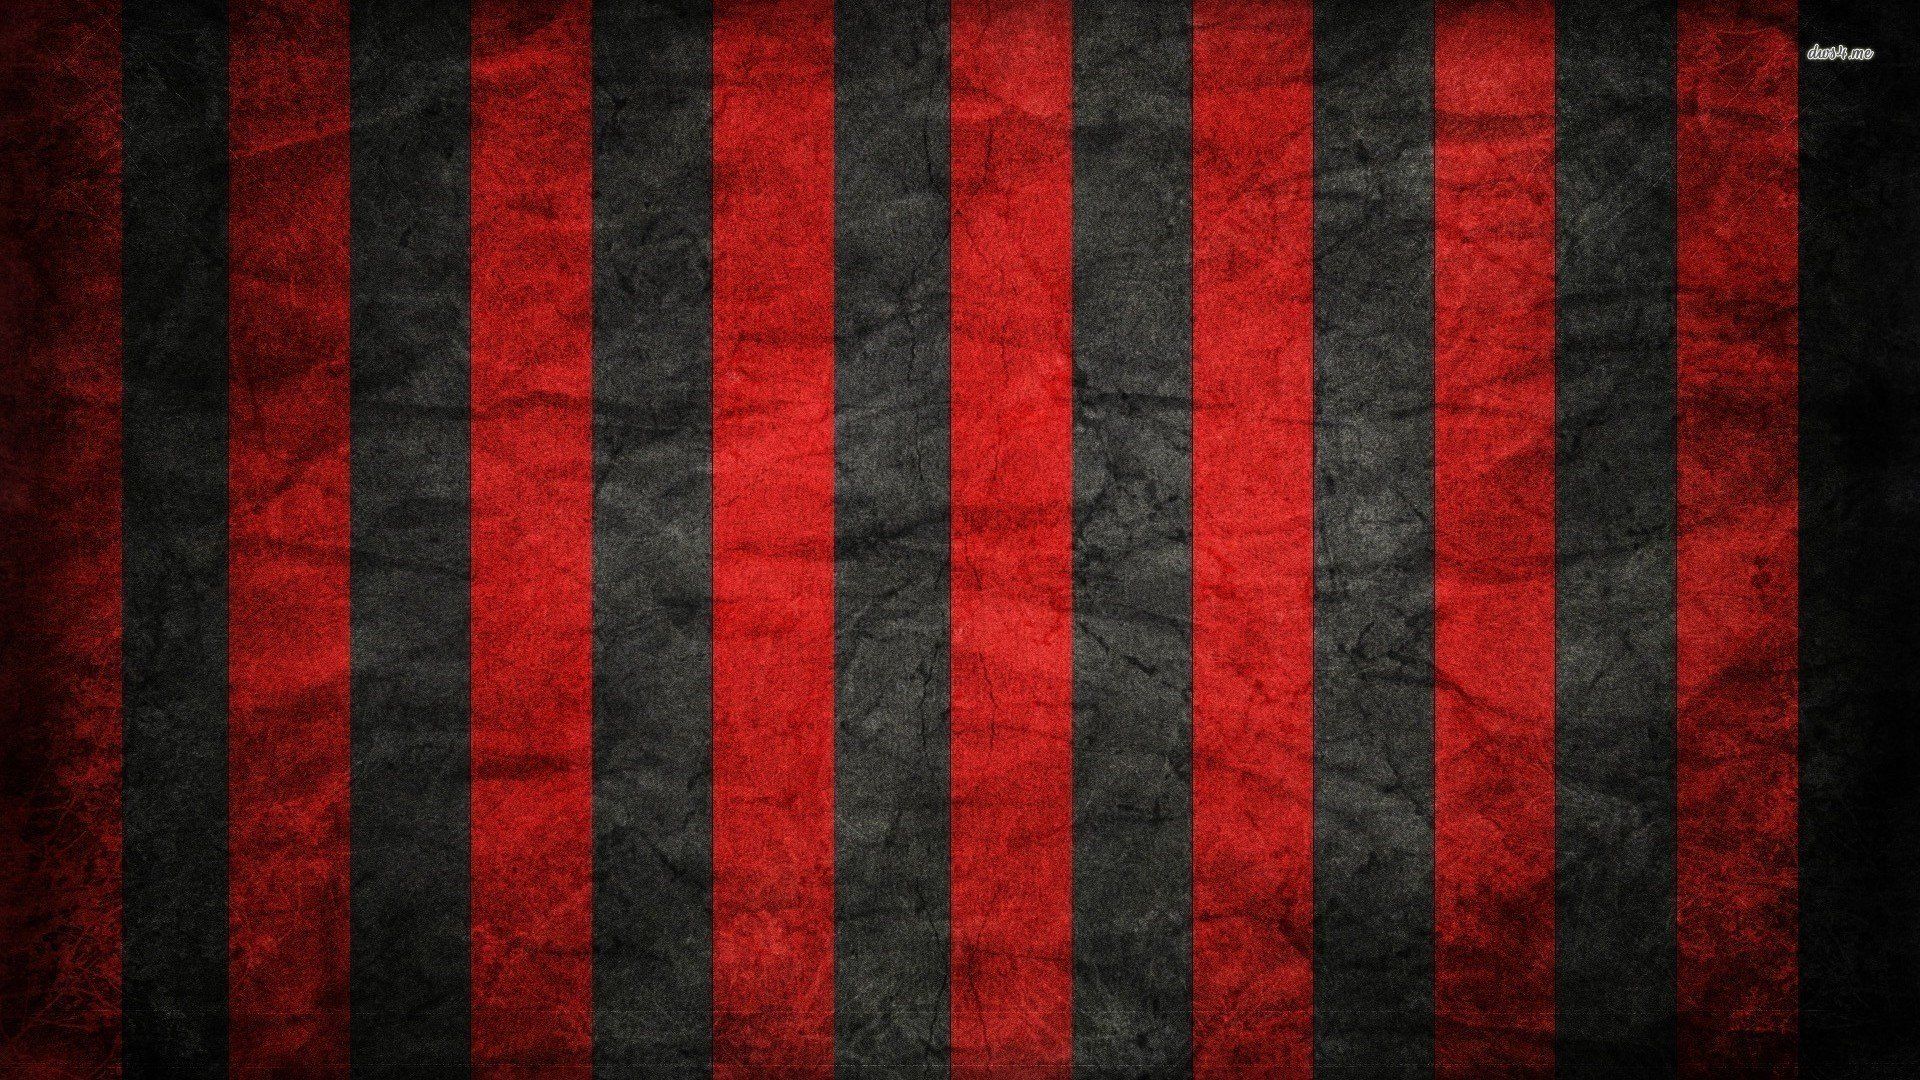 Black And Red Abstract wallpaper | 1920x1080 | 584198 | WallpaperUP